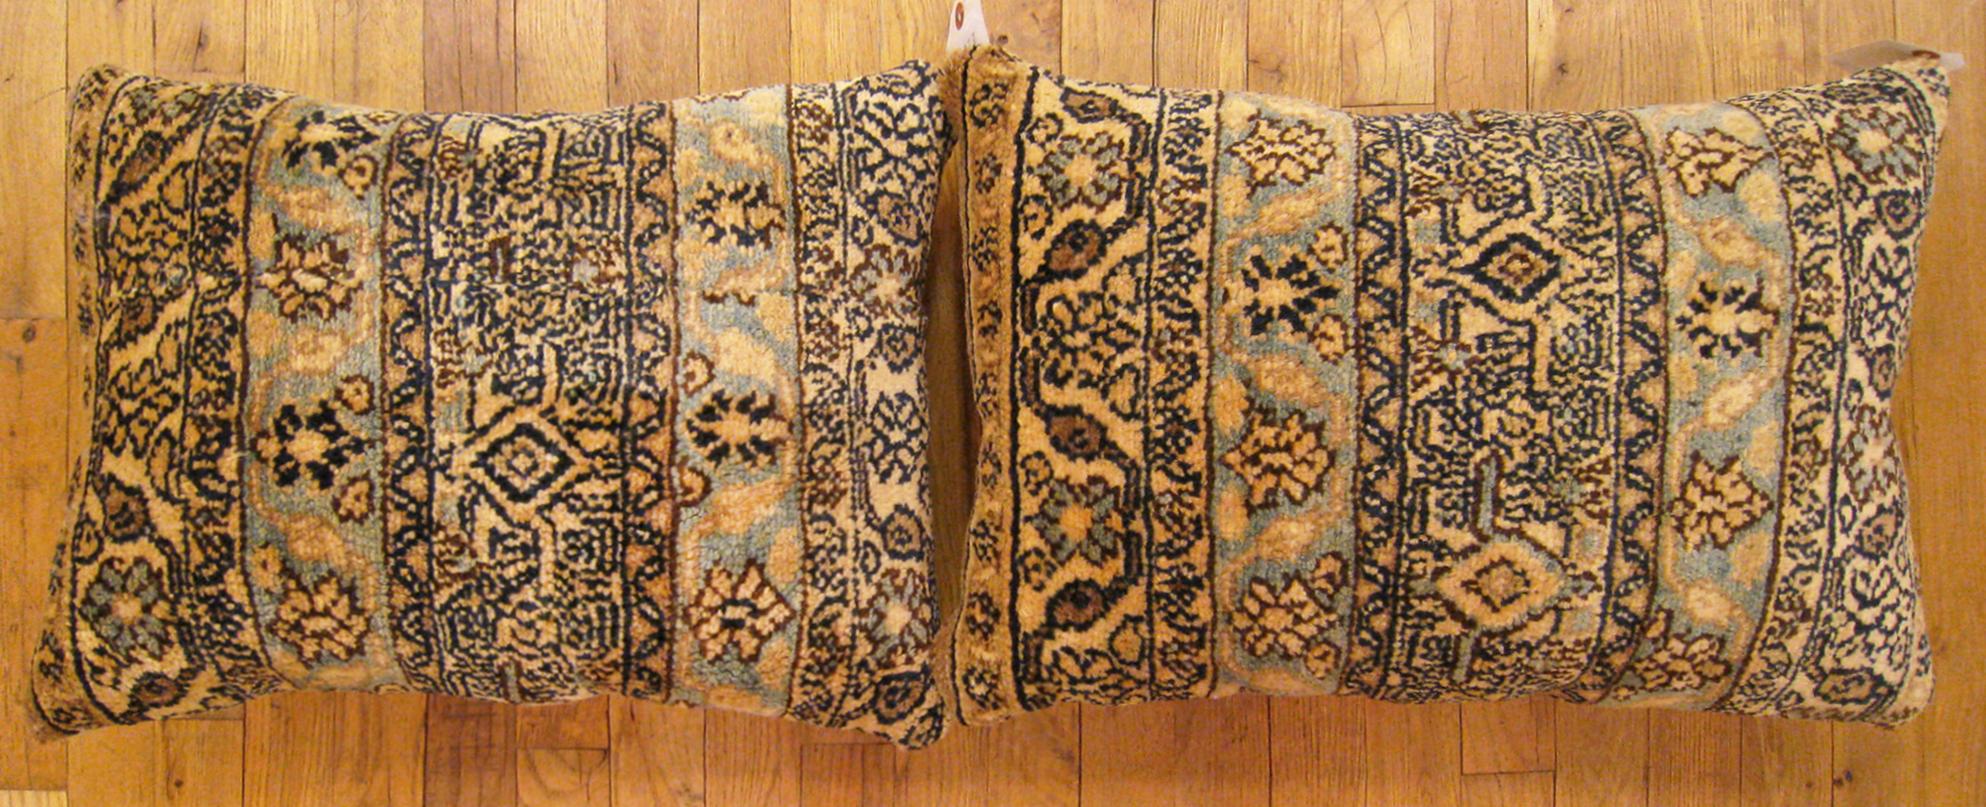 A pair of Antique Persian Hamadan rug pillows ; size 1'10” x 1'6” and 2'0” x 1'6”.

An antique decorative pillows with floral elements allover a beige central field, size 1'10” x 1'6” and 2'0” x 1'6”. This lovely decorative pillow features an